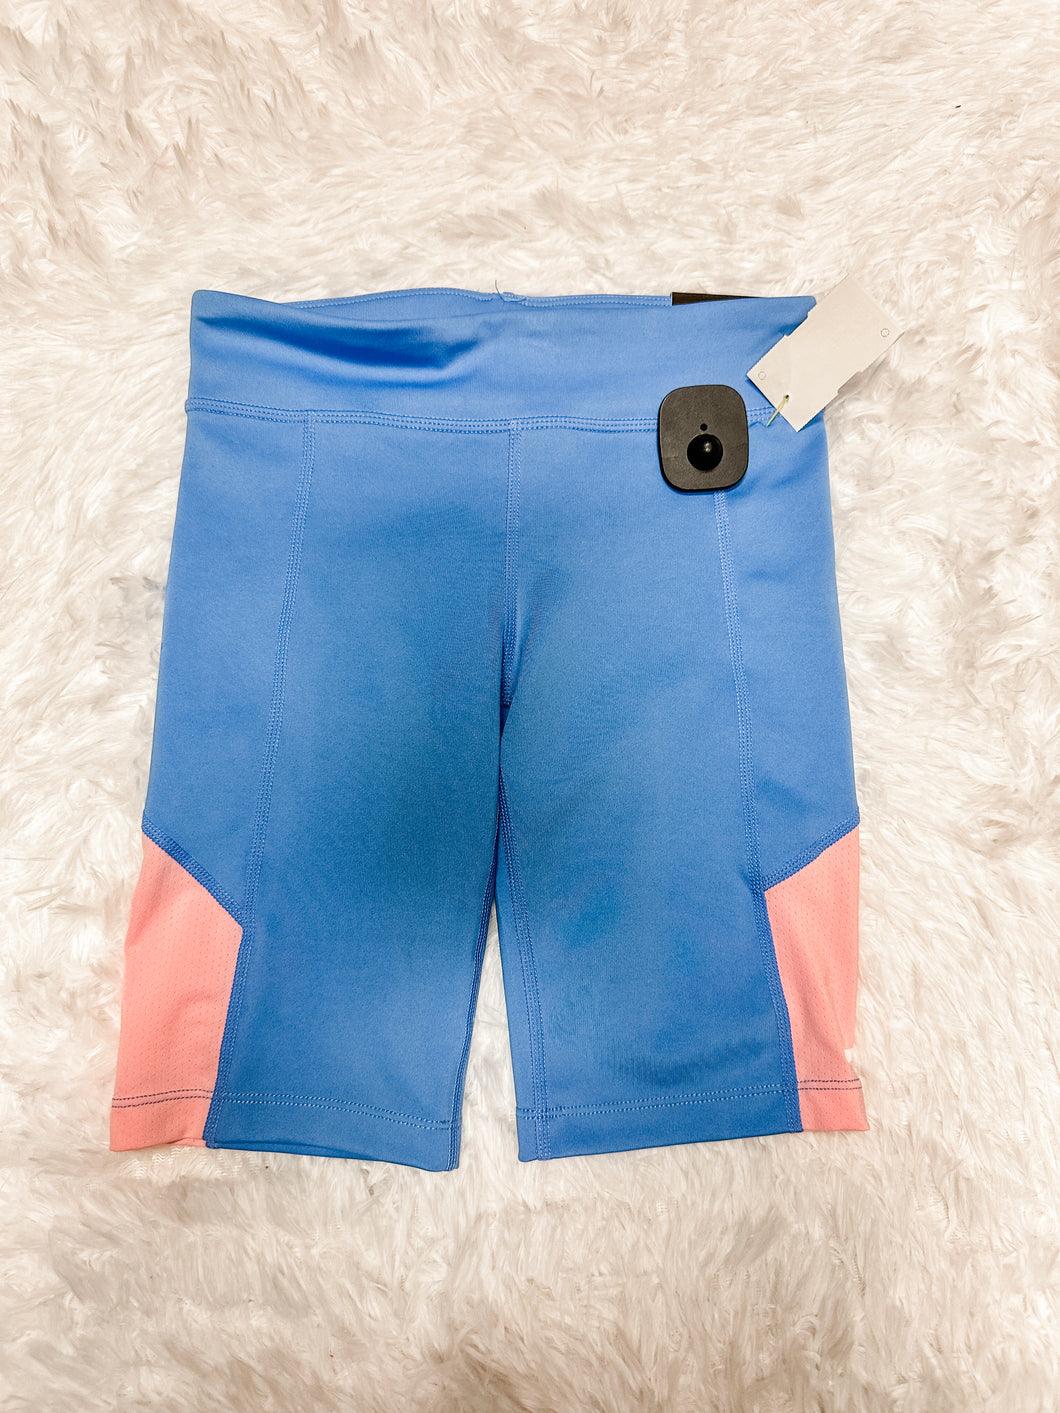 Nike Dri Fit Athletic Shorts Size Small M0479